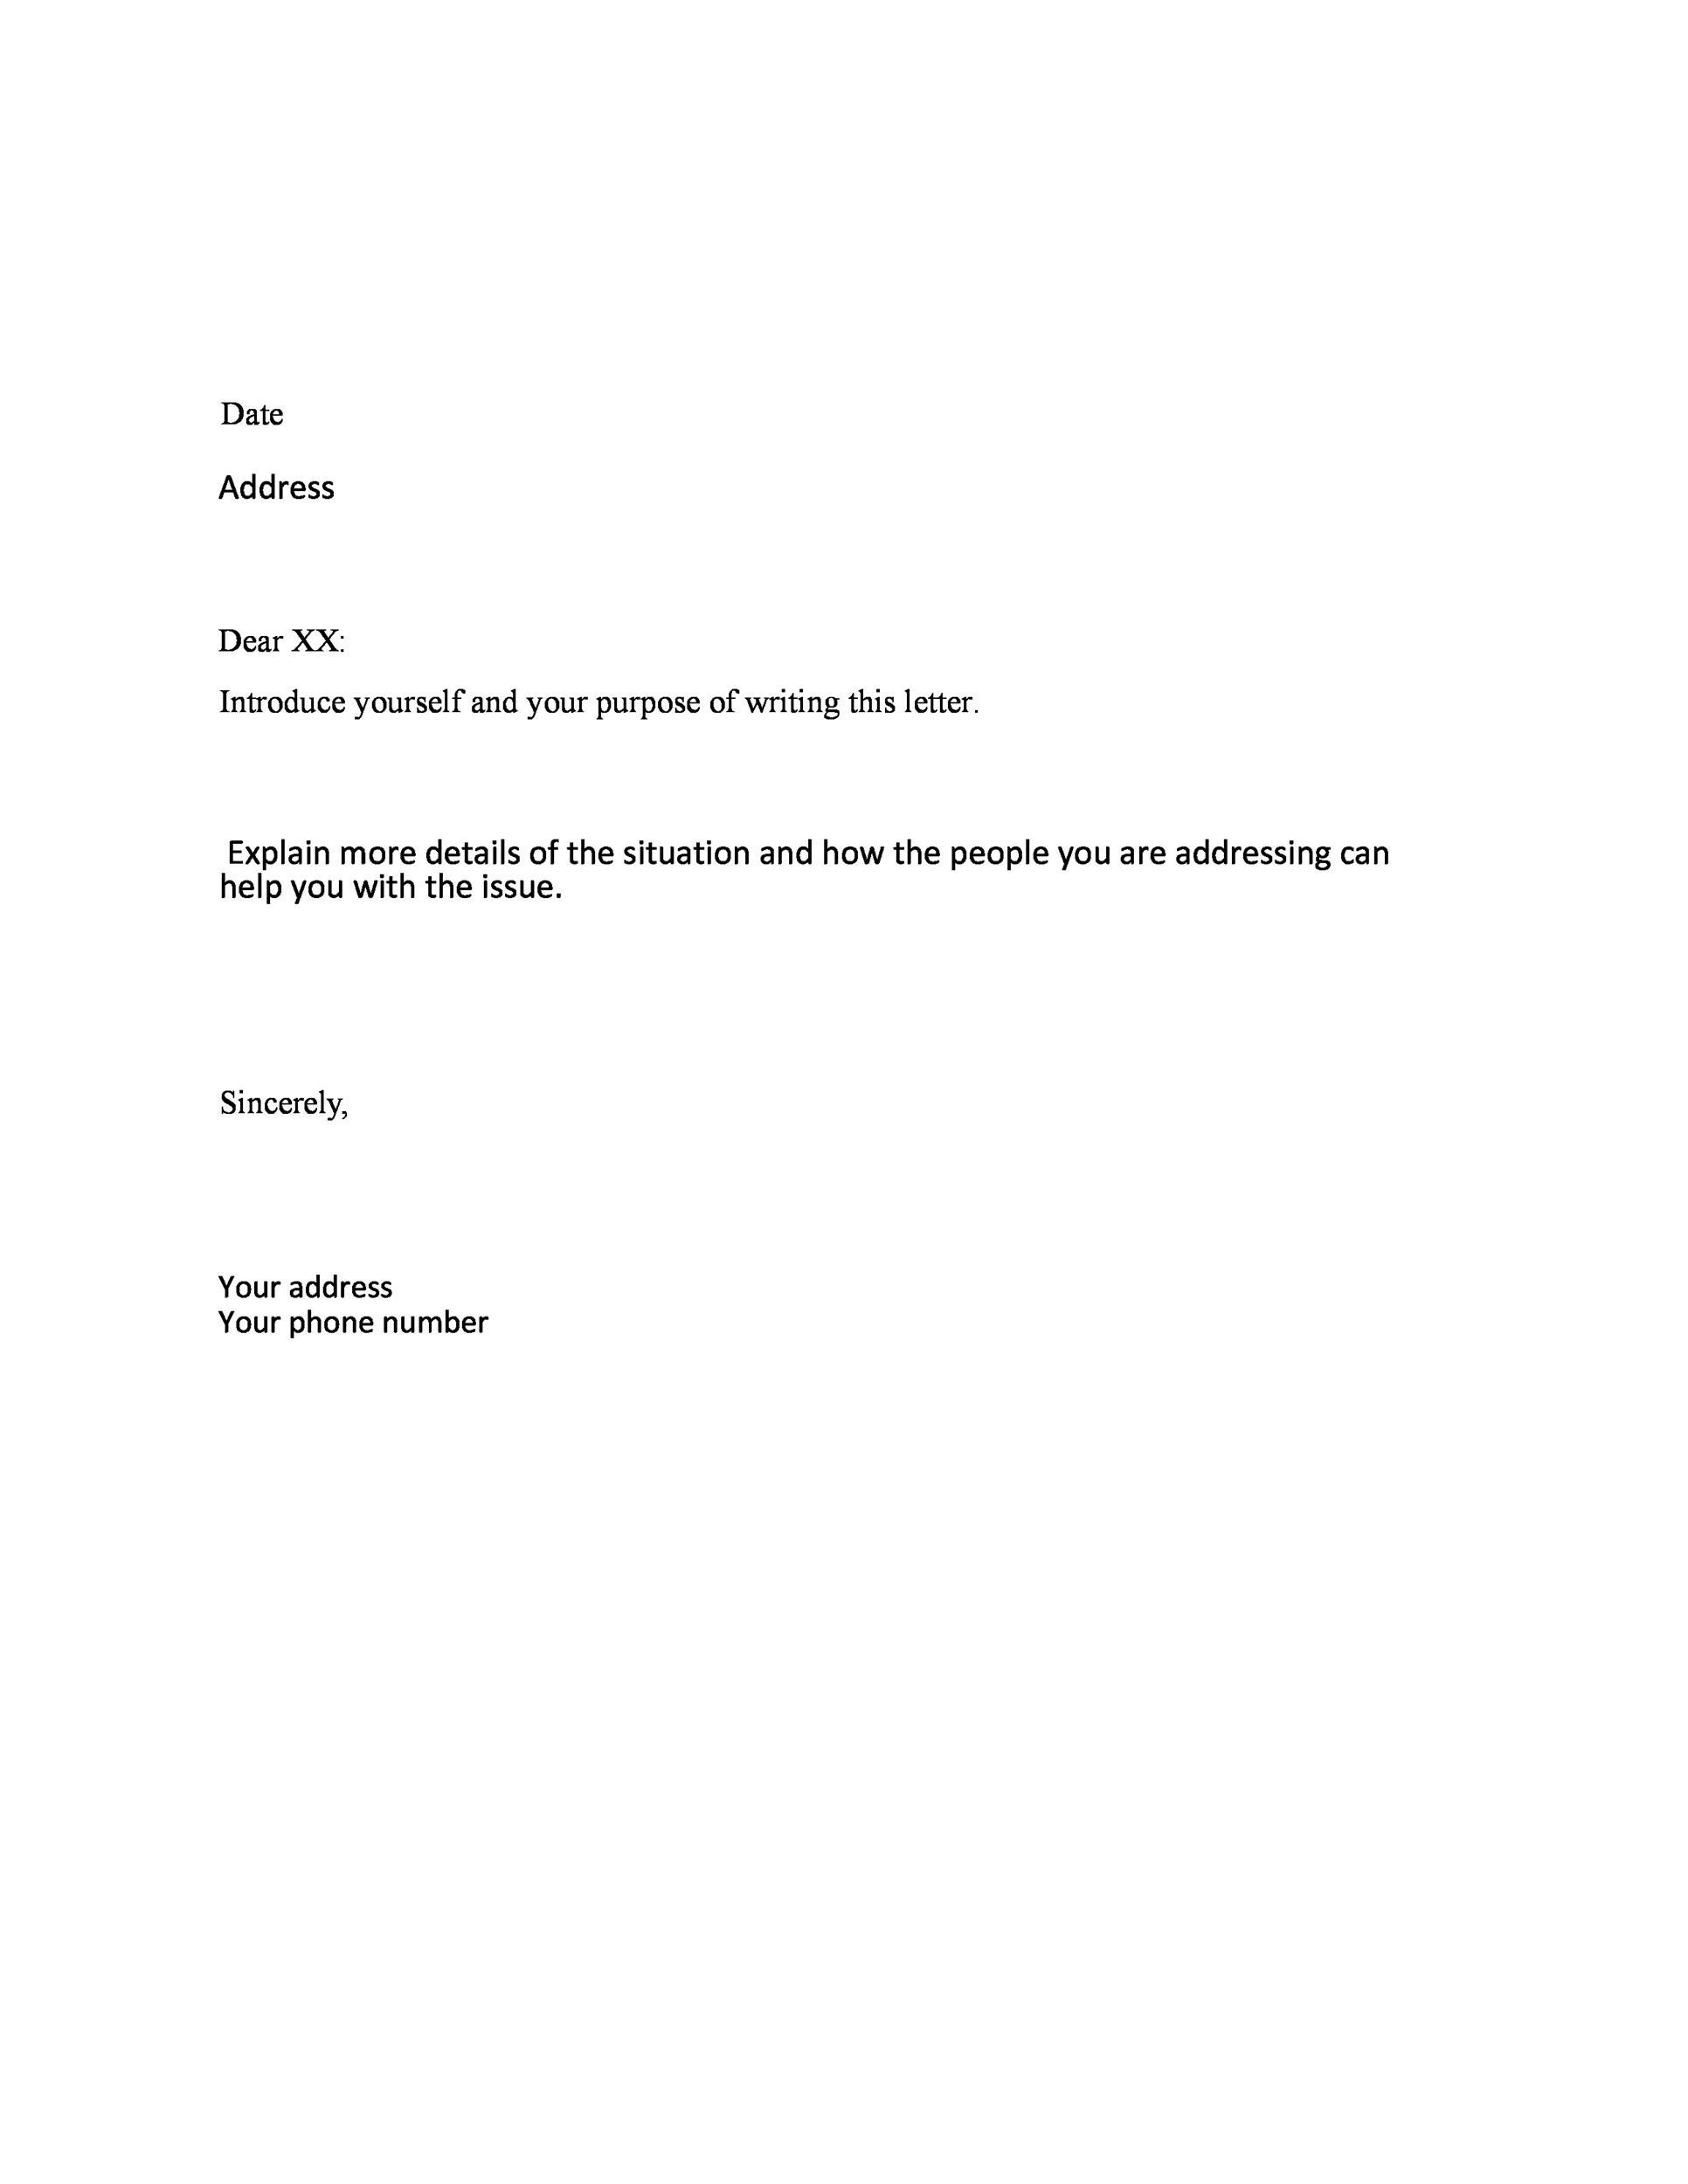 35 Formal Business Letter Format Templates Examples TemplateLab